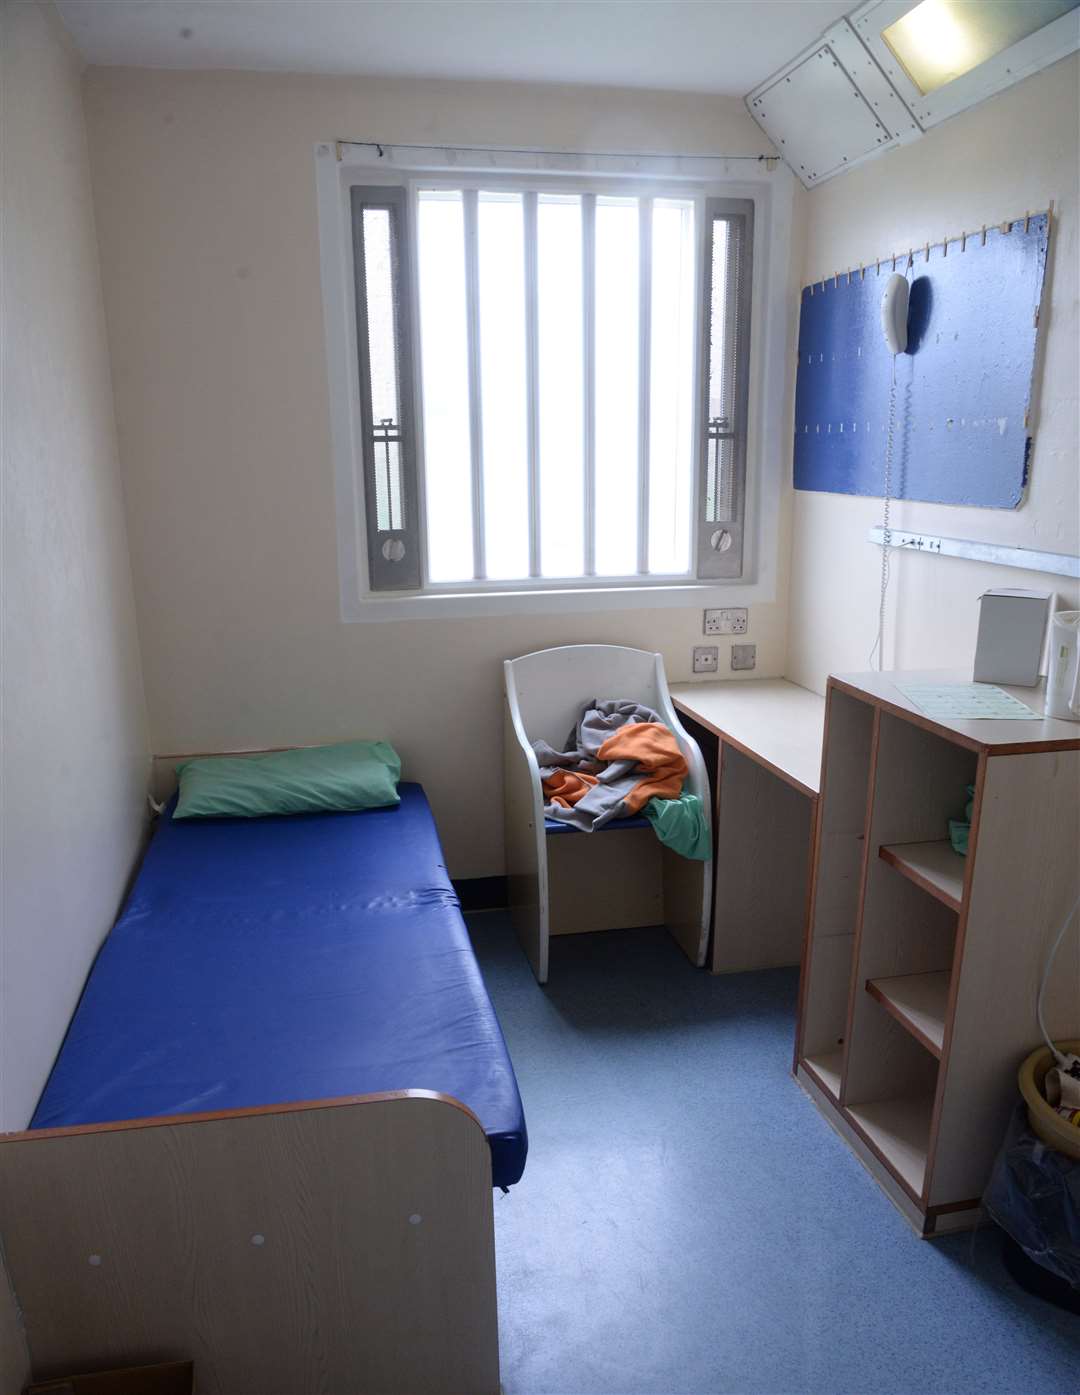 Smith claimed his cell was being used as an armoury by other inmates. Stock picture: Chris Davey